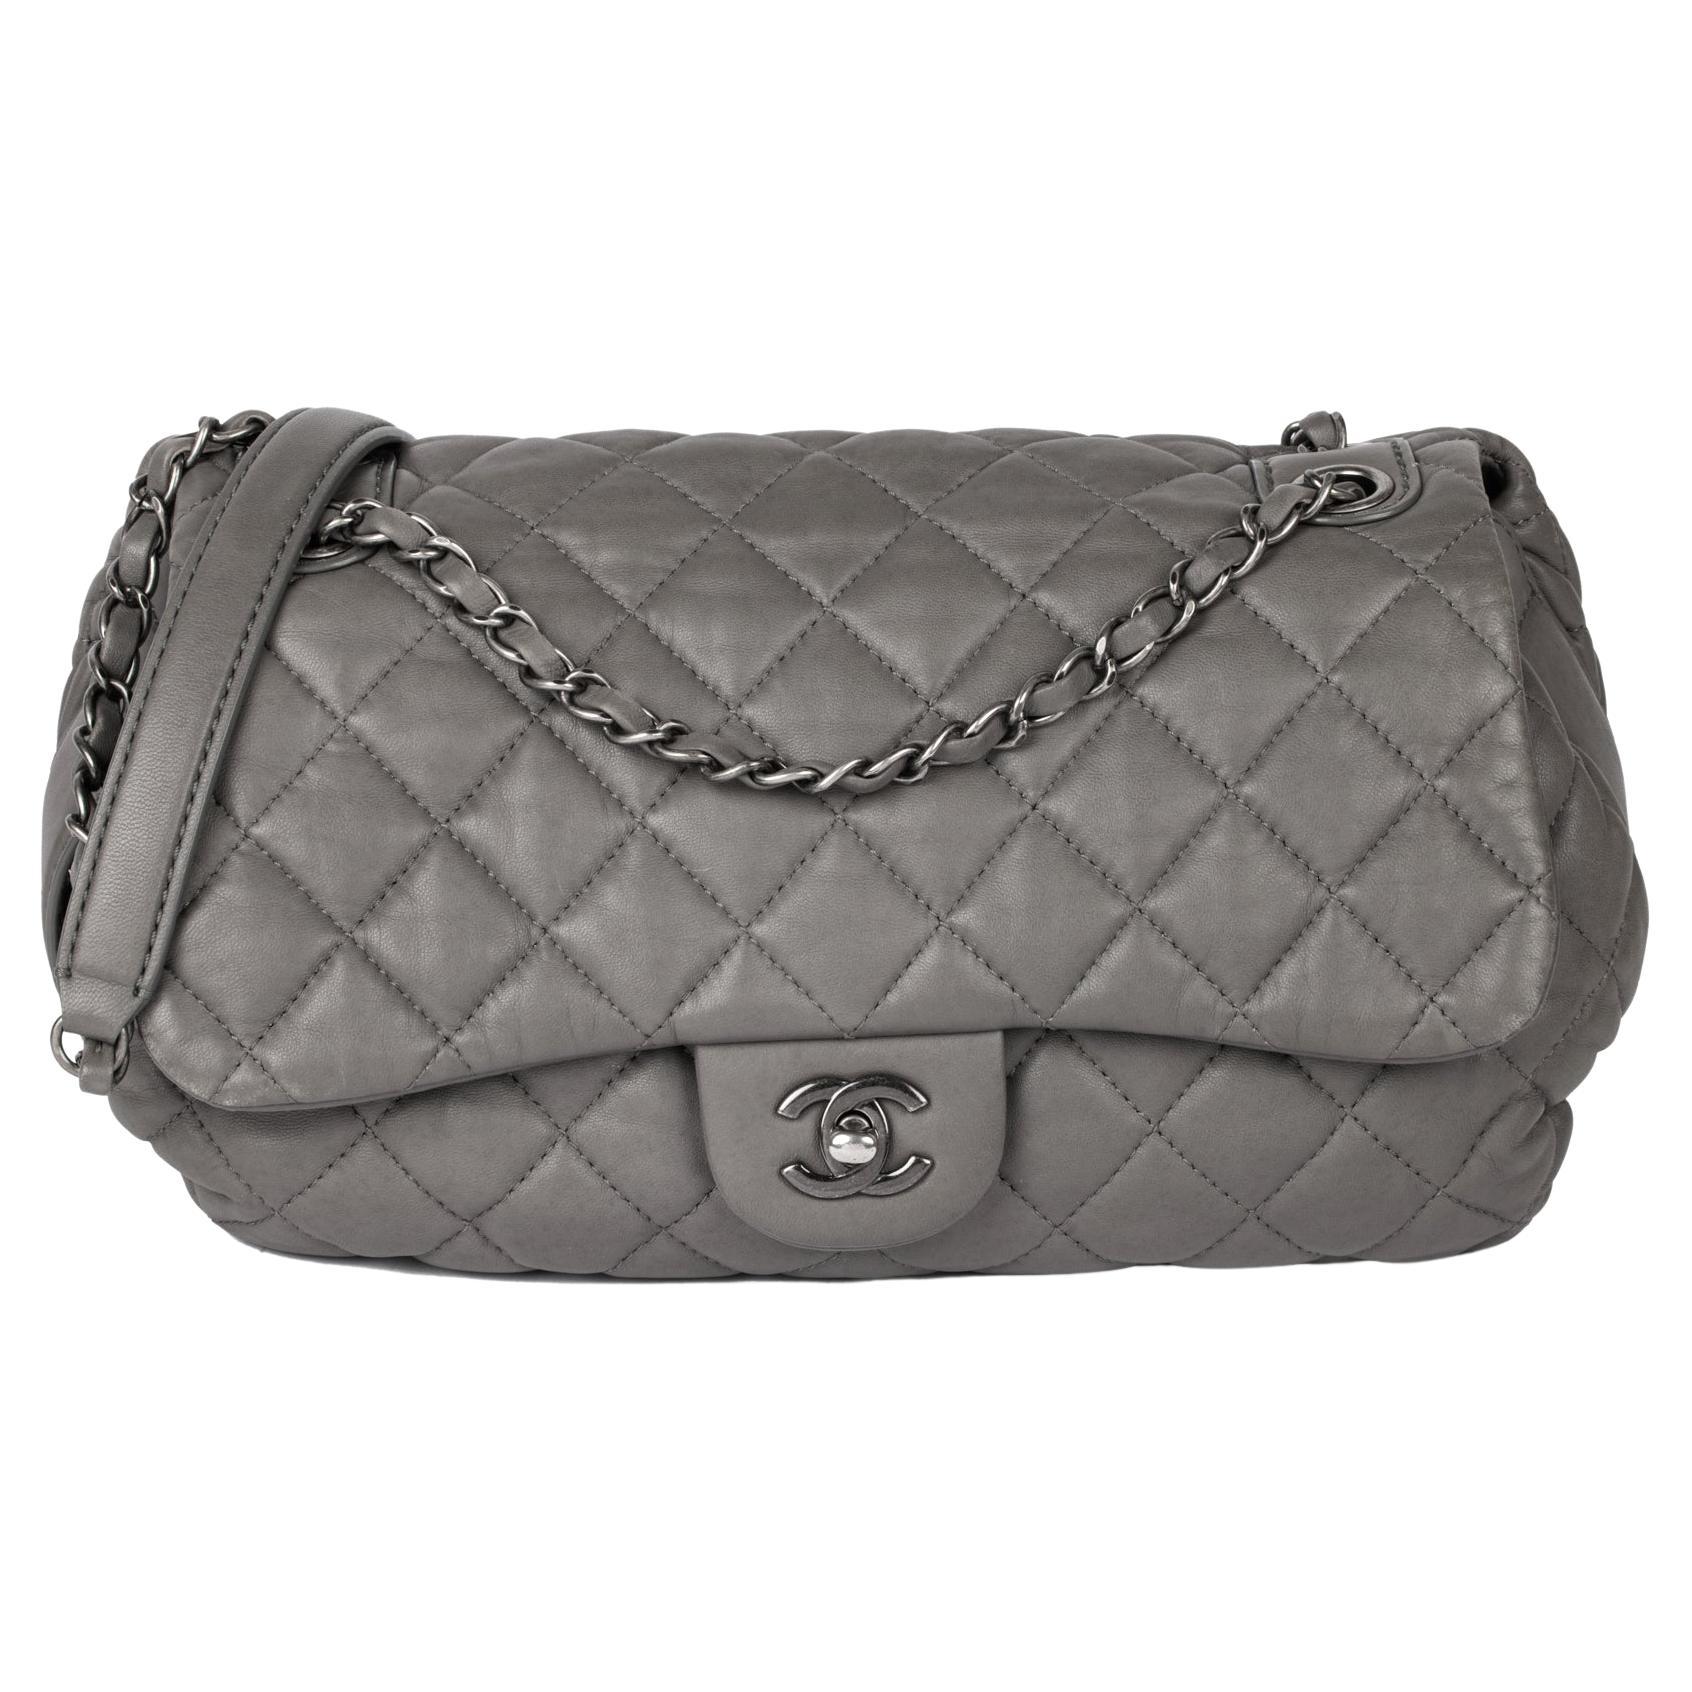 CHANEL Grey Quilted Lambskin Classic Single Flap Bag